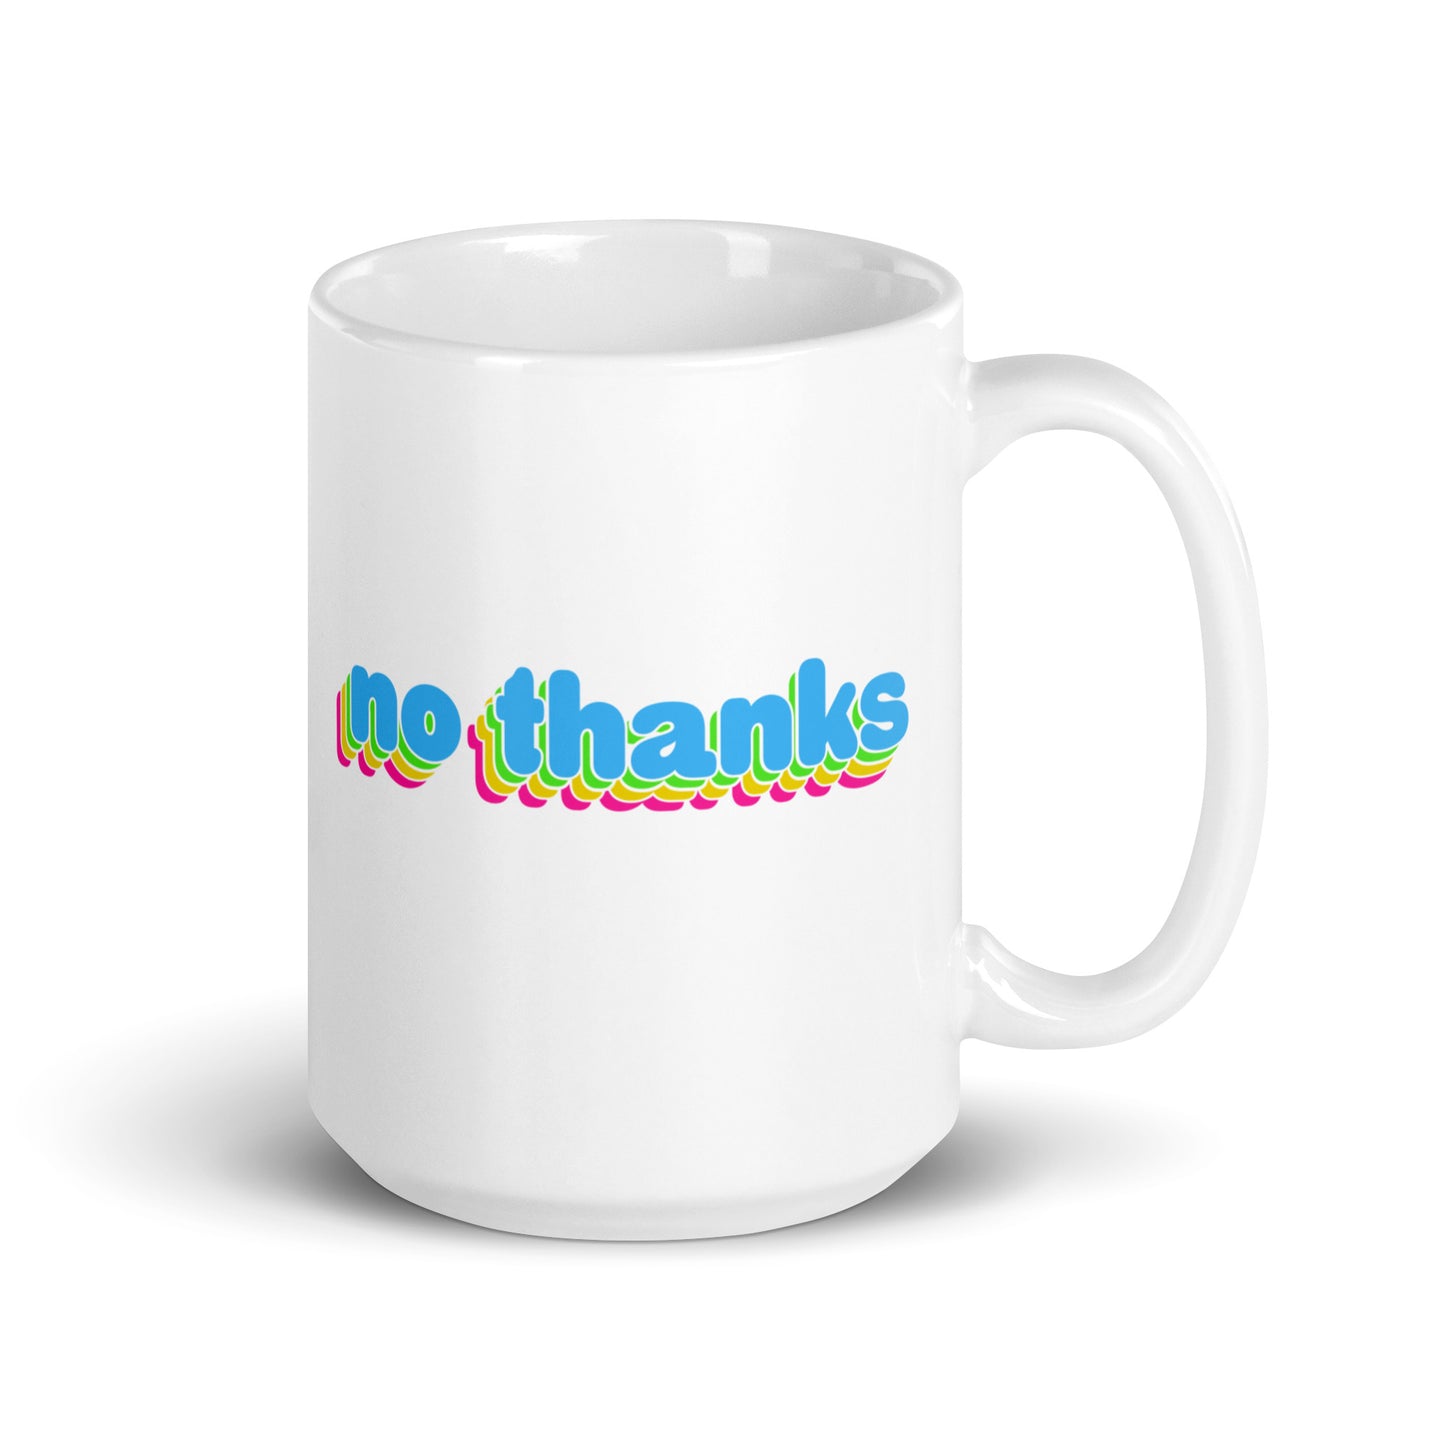 A white 15 oz ceramic mug with the handle to the right featuring colorful bubble text reading "no thanks"